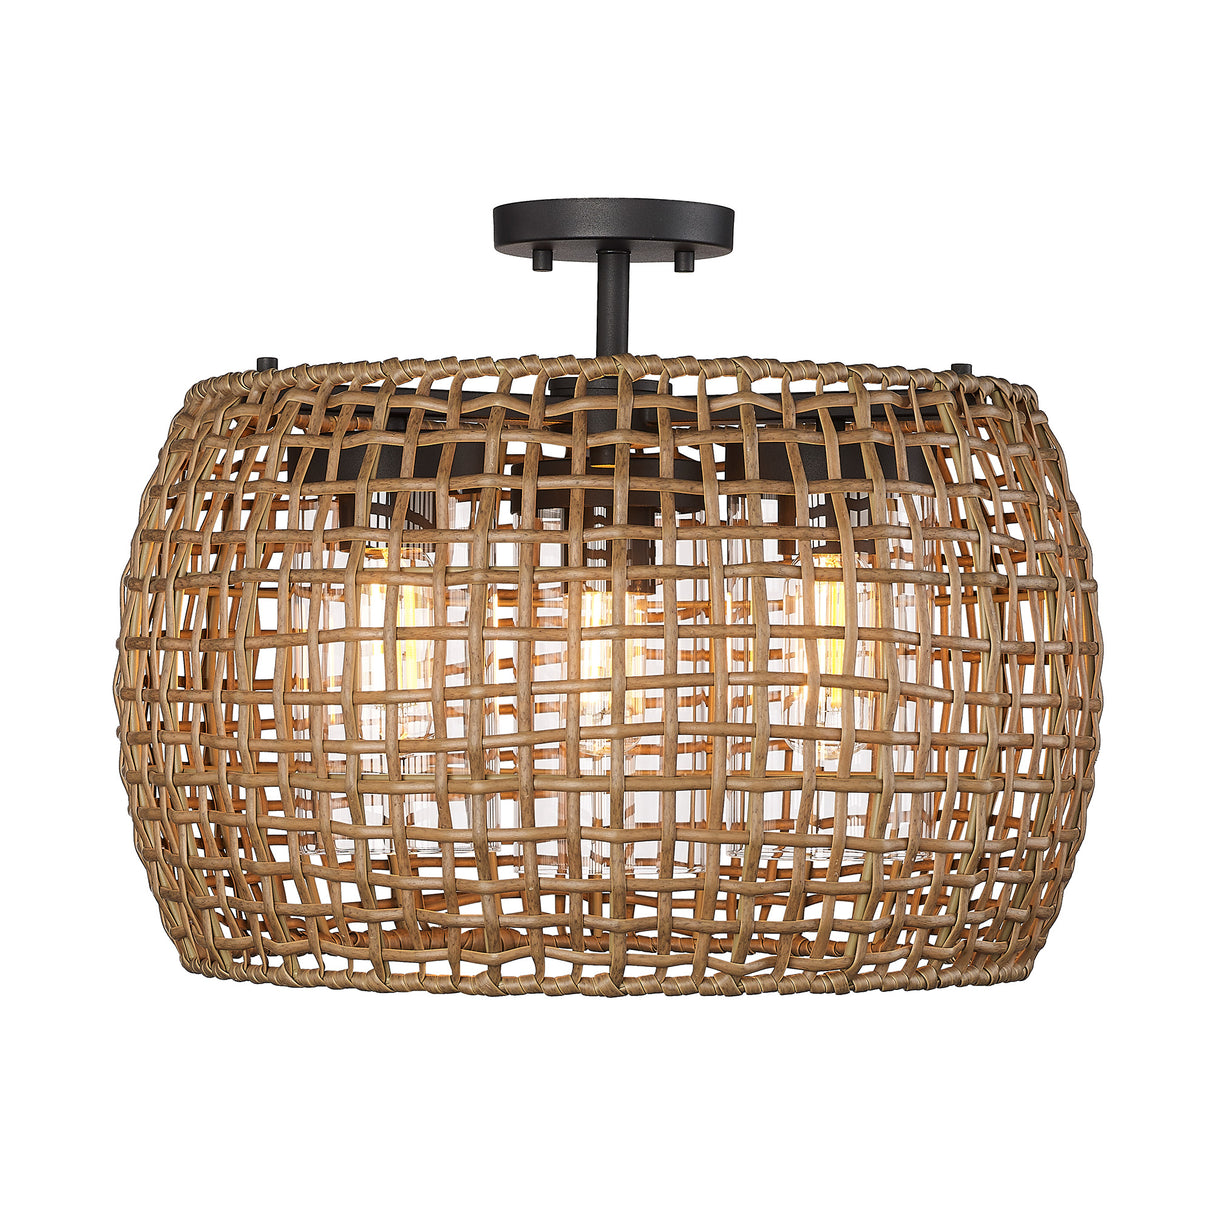 Piper 3 Light Semi-Flush - Outdoor in Natural Black with Maple All-Weather Wicker Shade